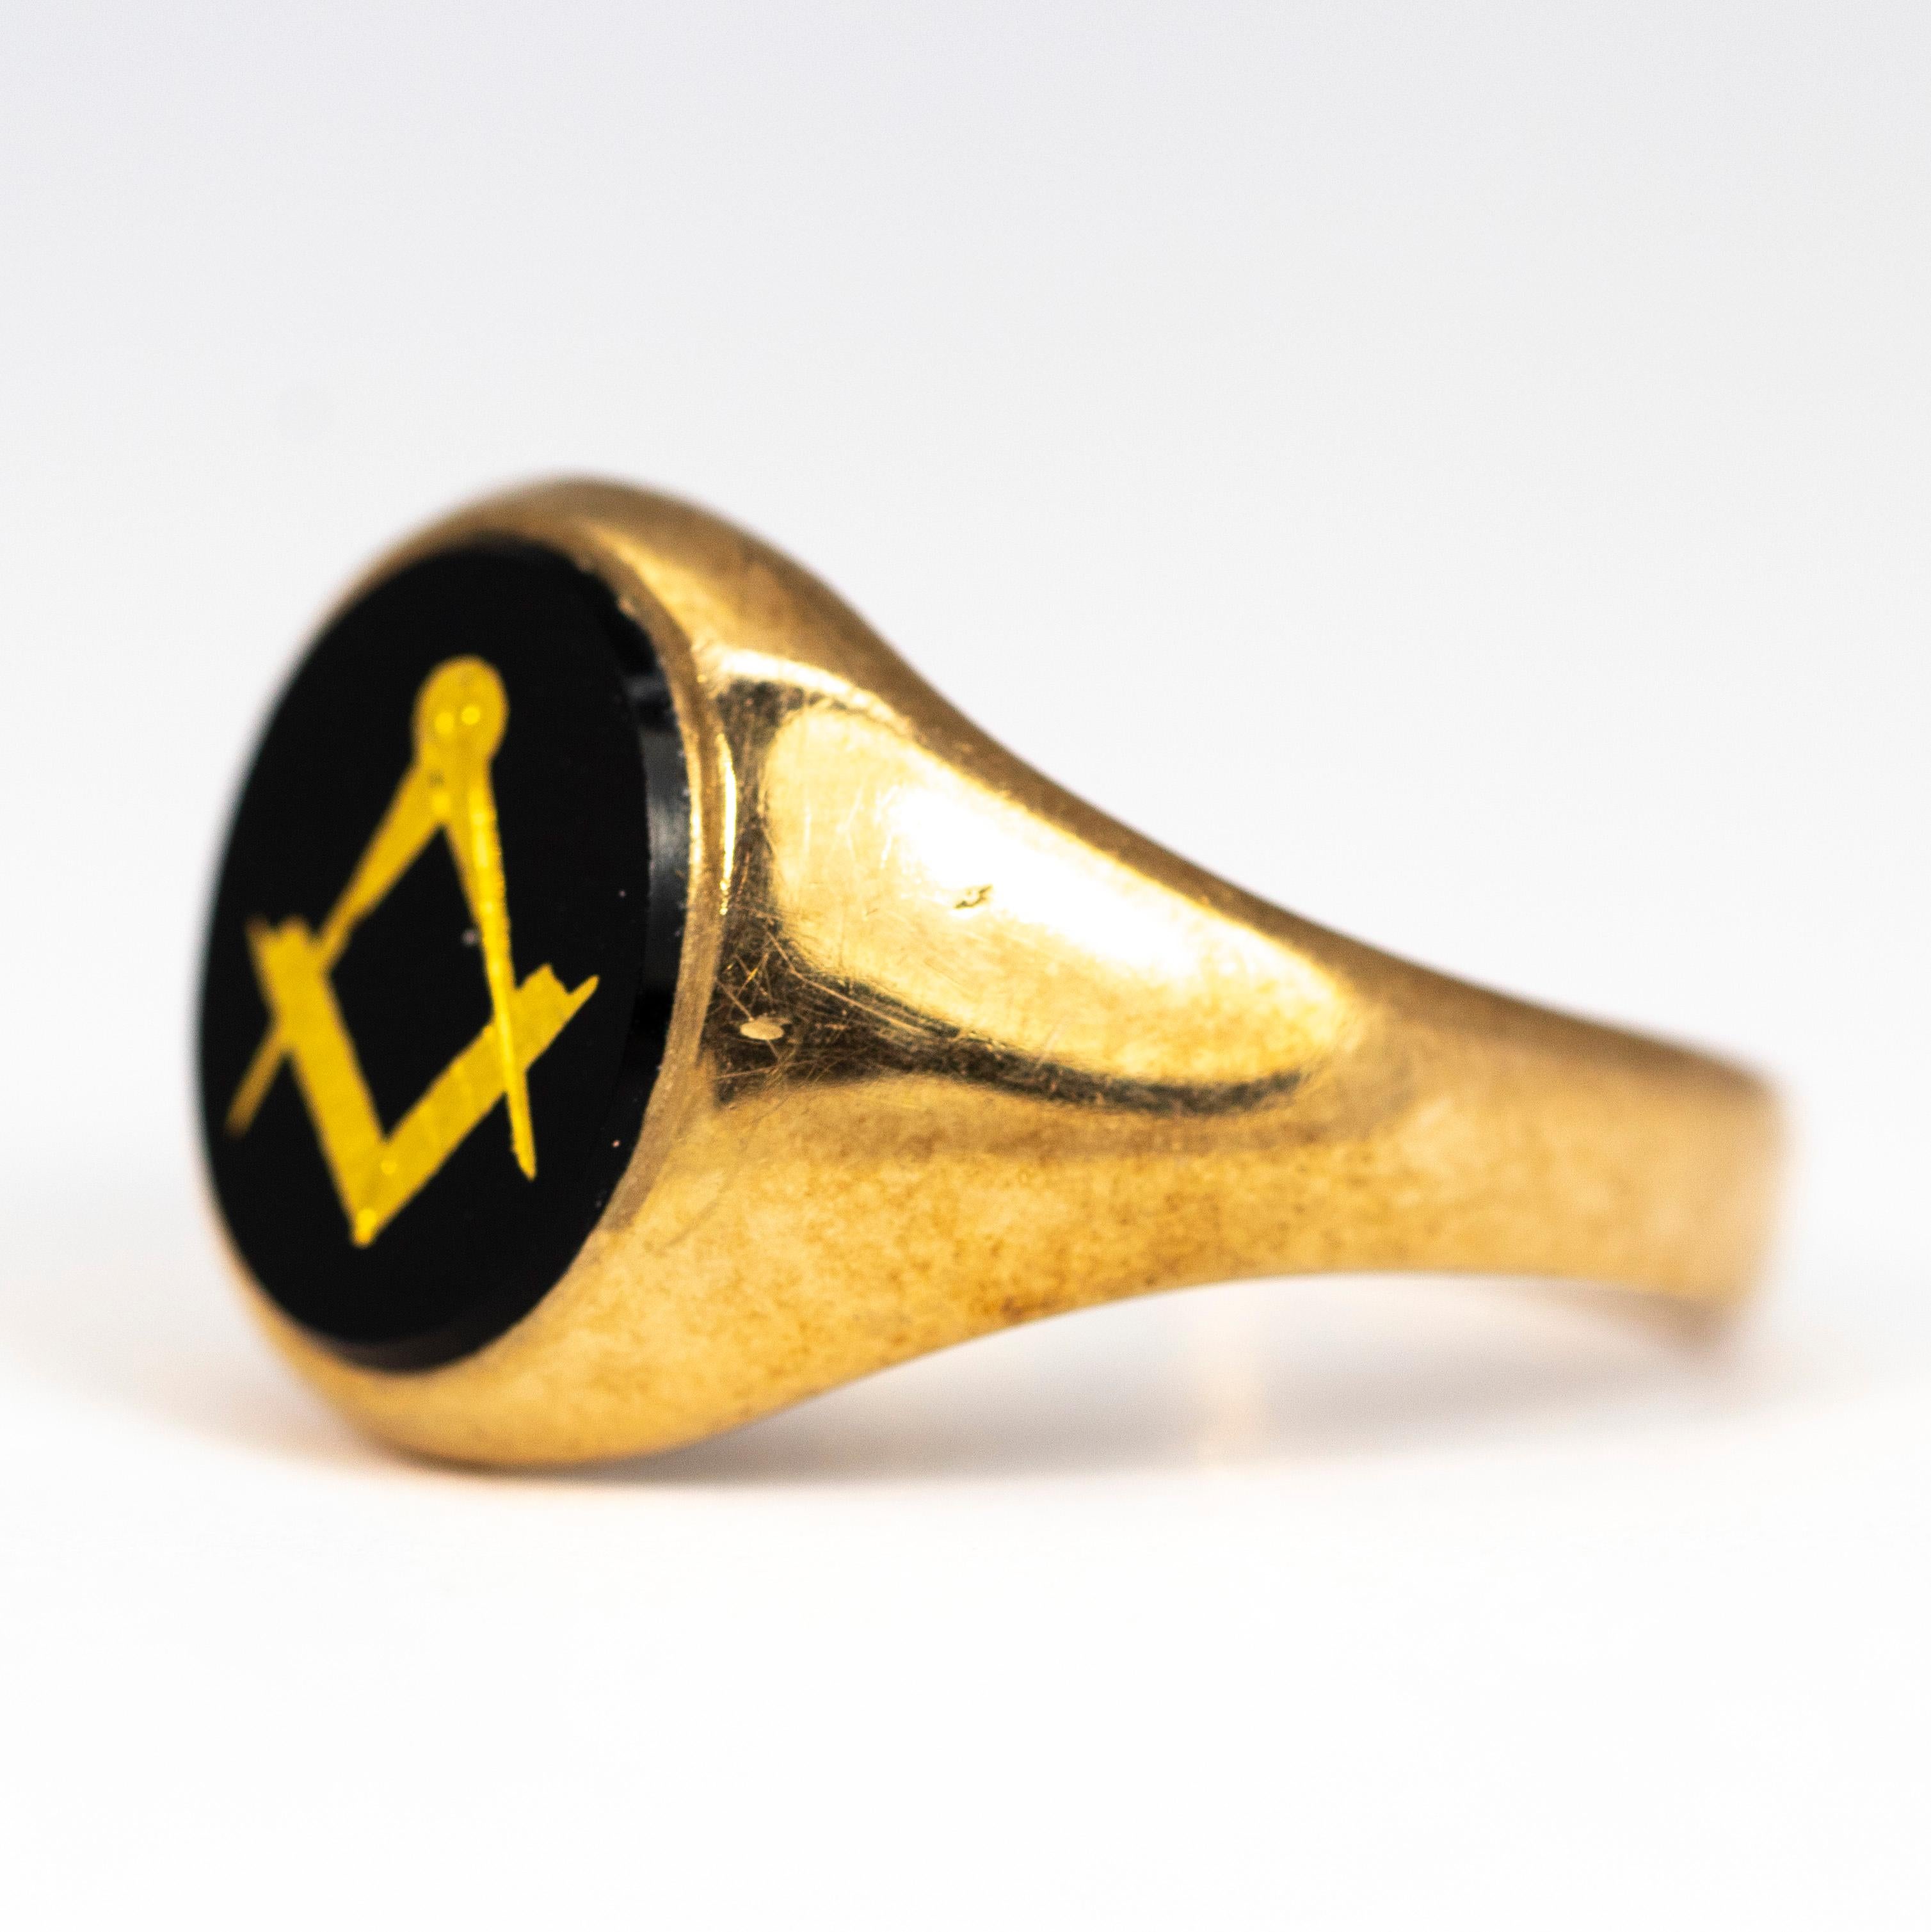 This masonic signet ring is modelled in 9 carat old and has a classic motif engraved in fine gold and is embedded in the glossy black onyx. Made in London, England.

Ring Size: U 1/2 or 10 1/2
Widest point: 14mm 

Weight: 5.5grams 